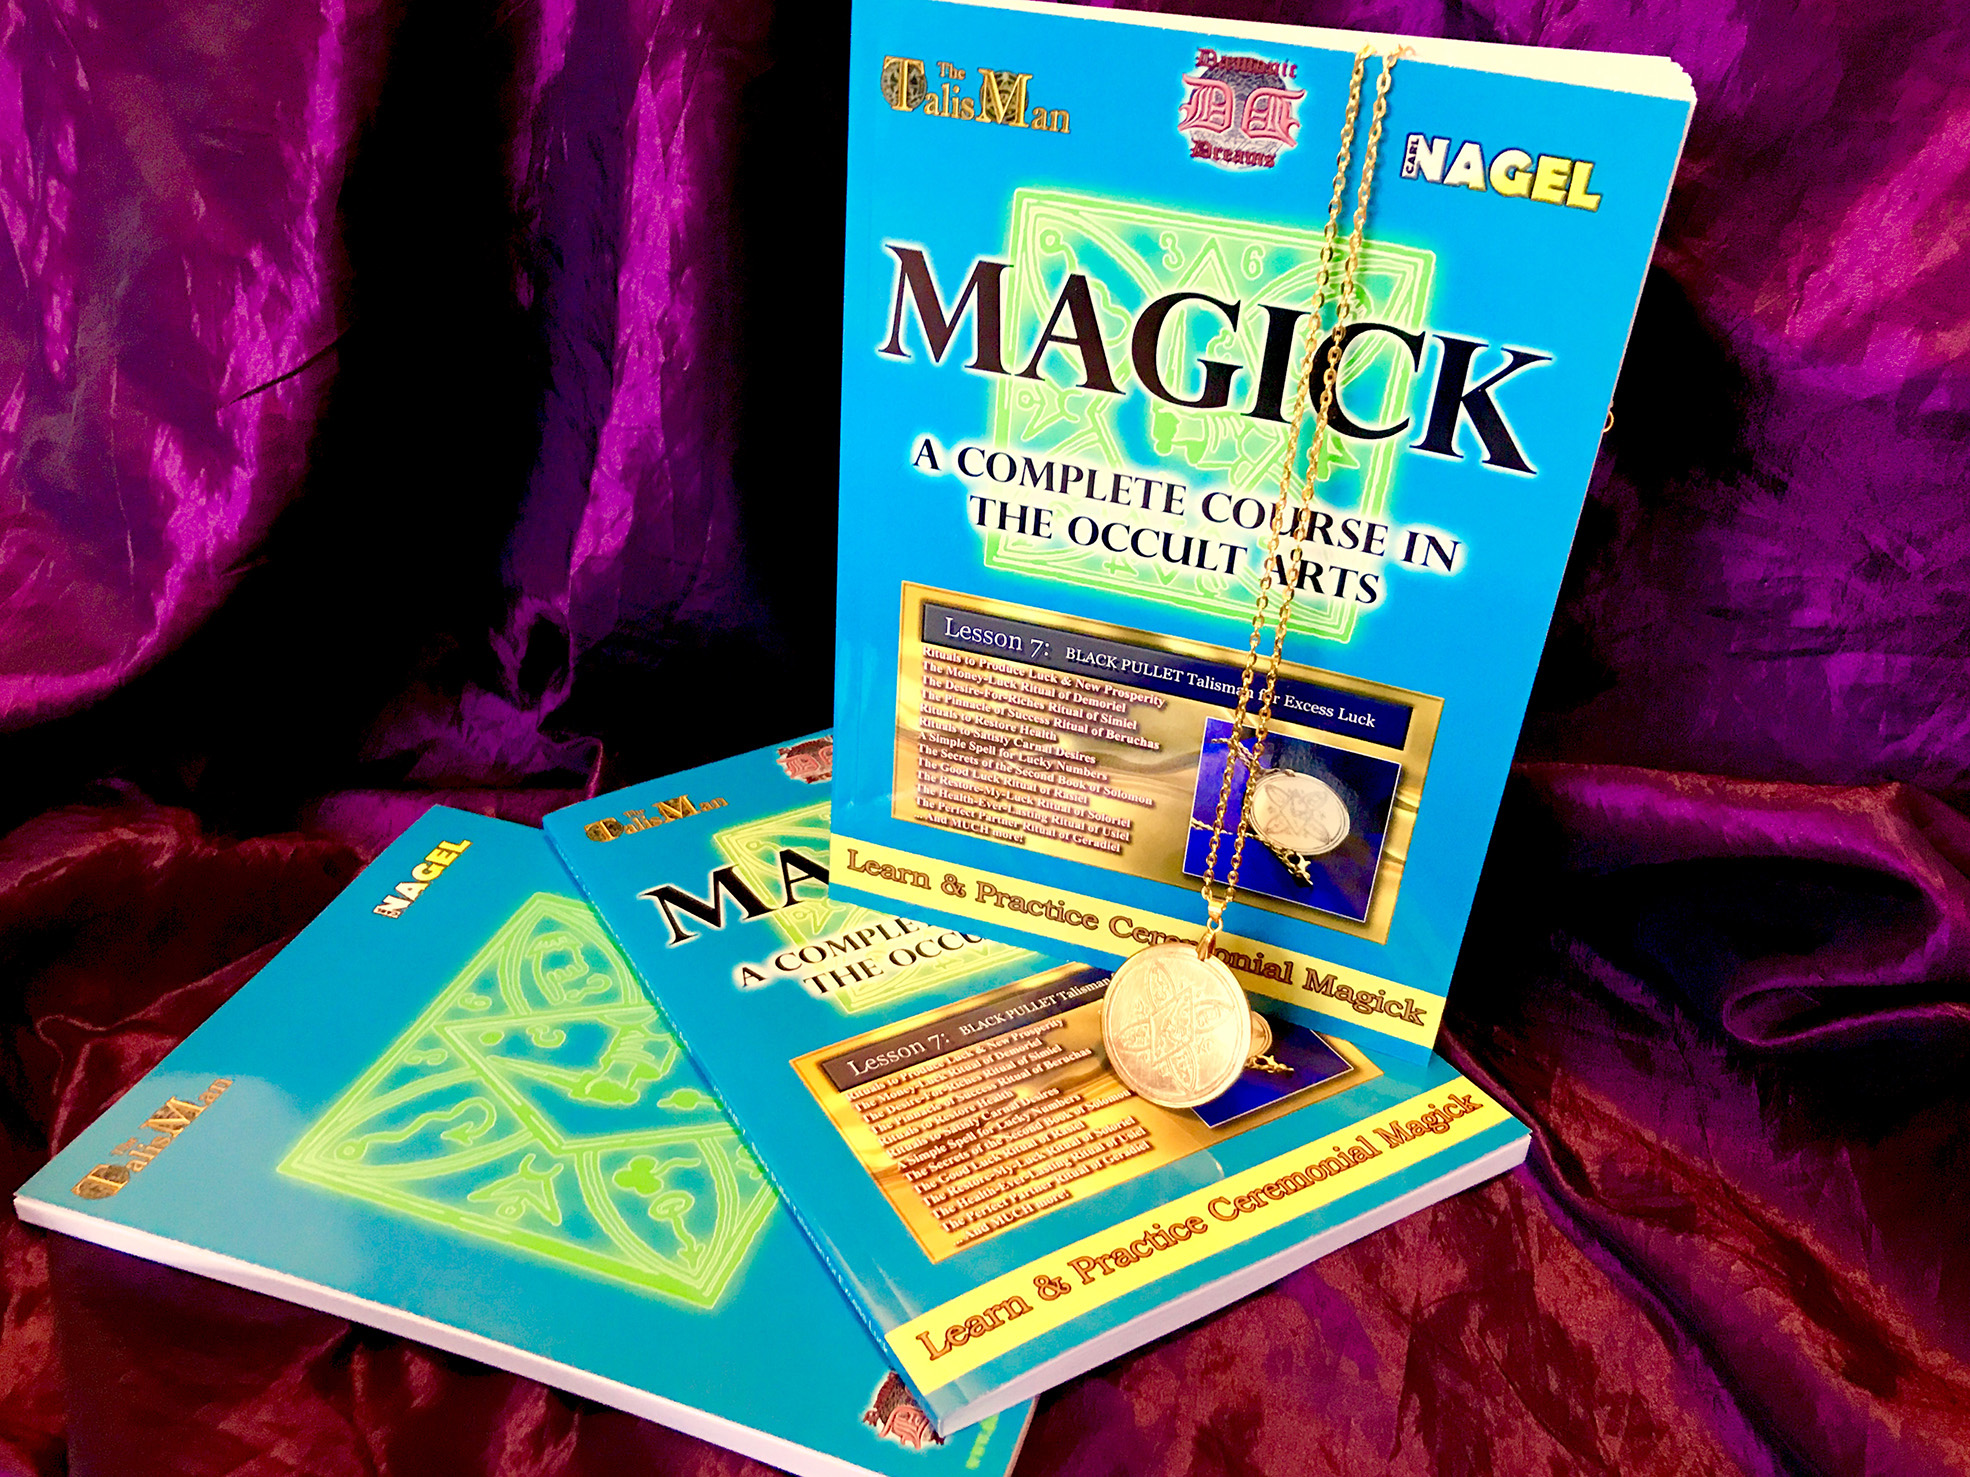 MAGICK - A Complete Course in the Occult Arts Vol. 7